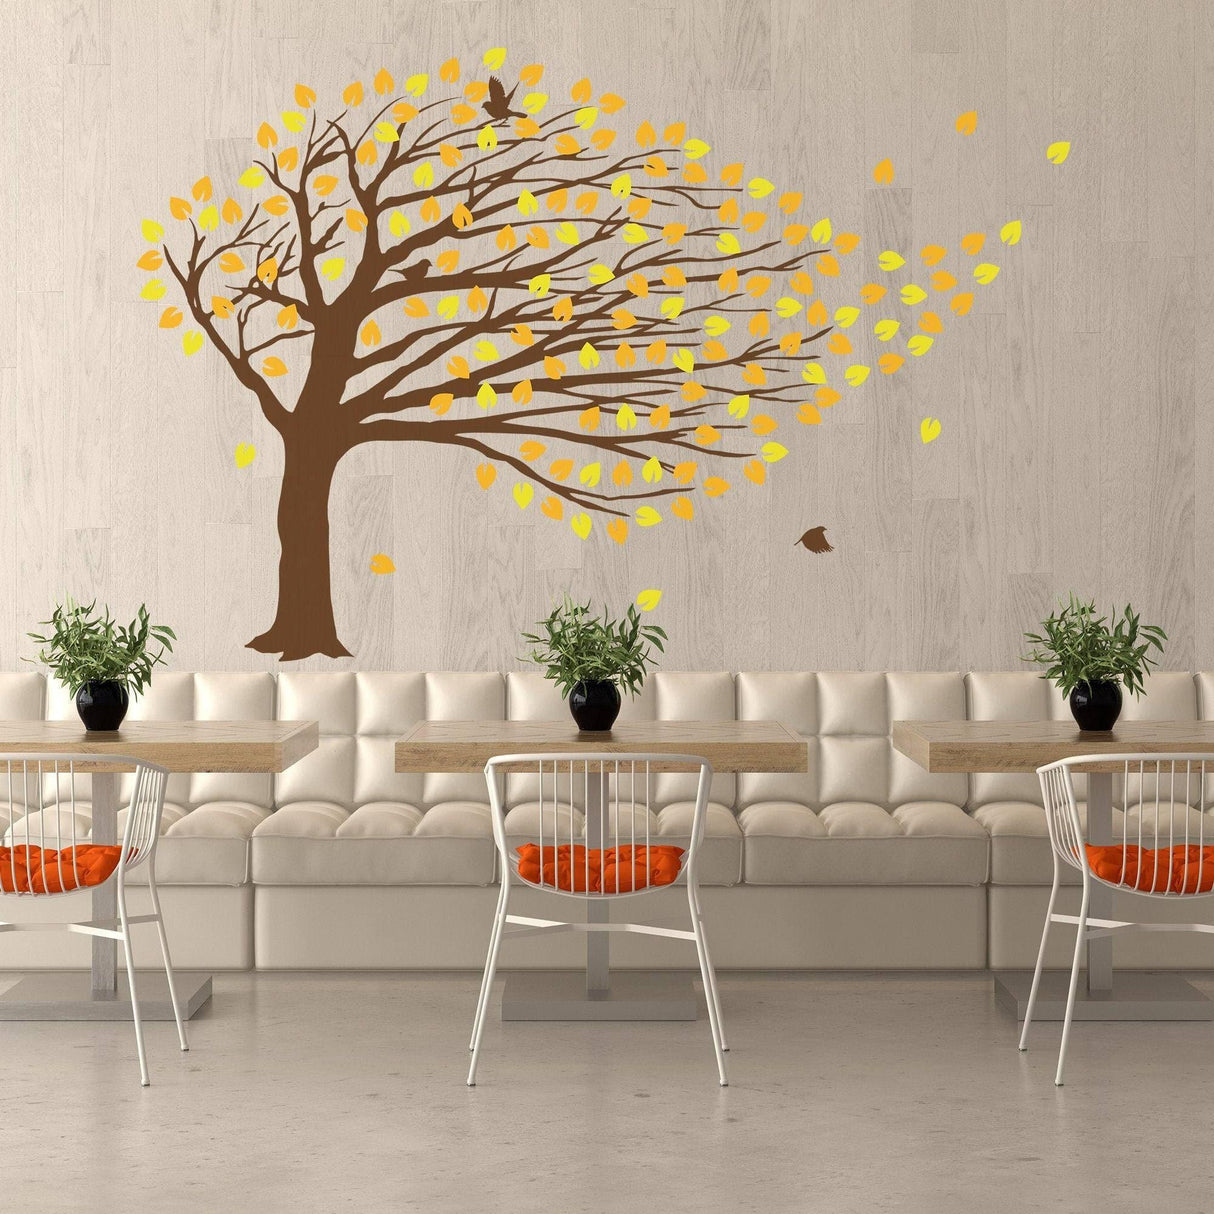 Windy Tree Wall Decal Vinyl Sticker - Nursery Art Decor Blossom Large Green Decals - Blowing Autumn Bending Swaying Baby Blown Stickers - Decords